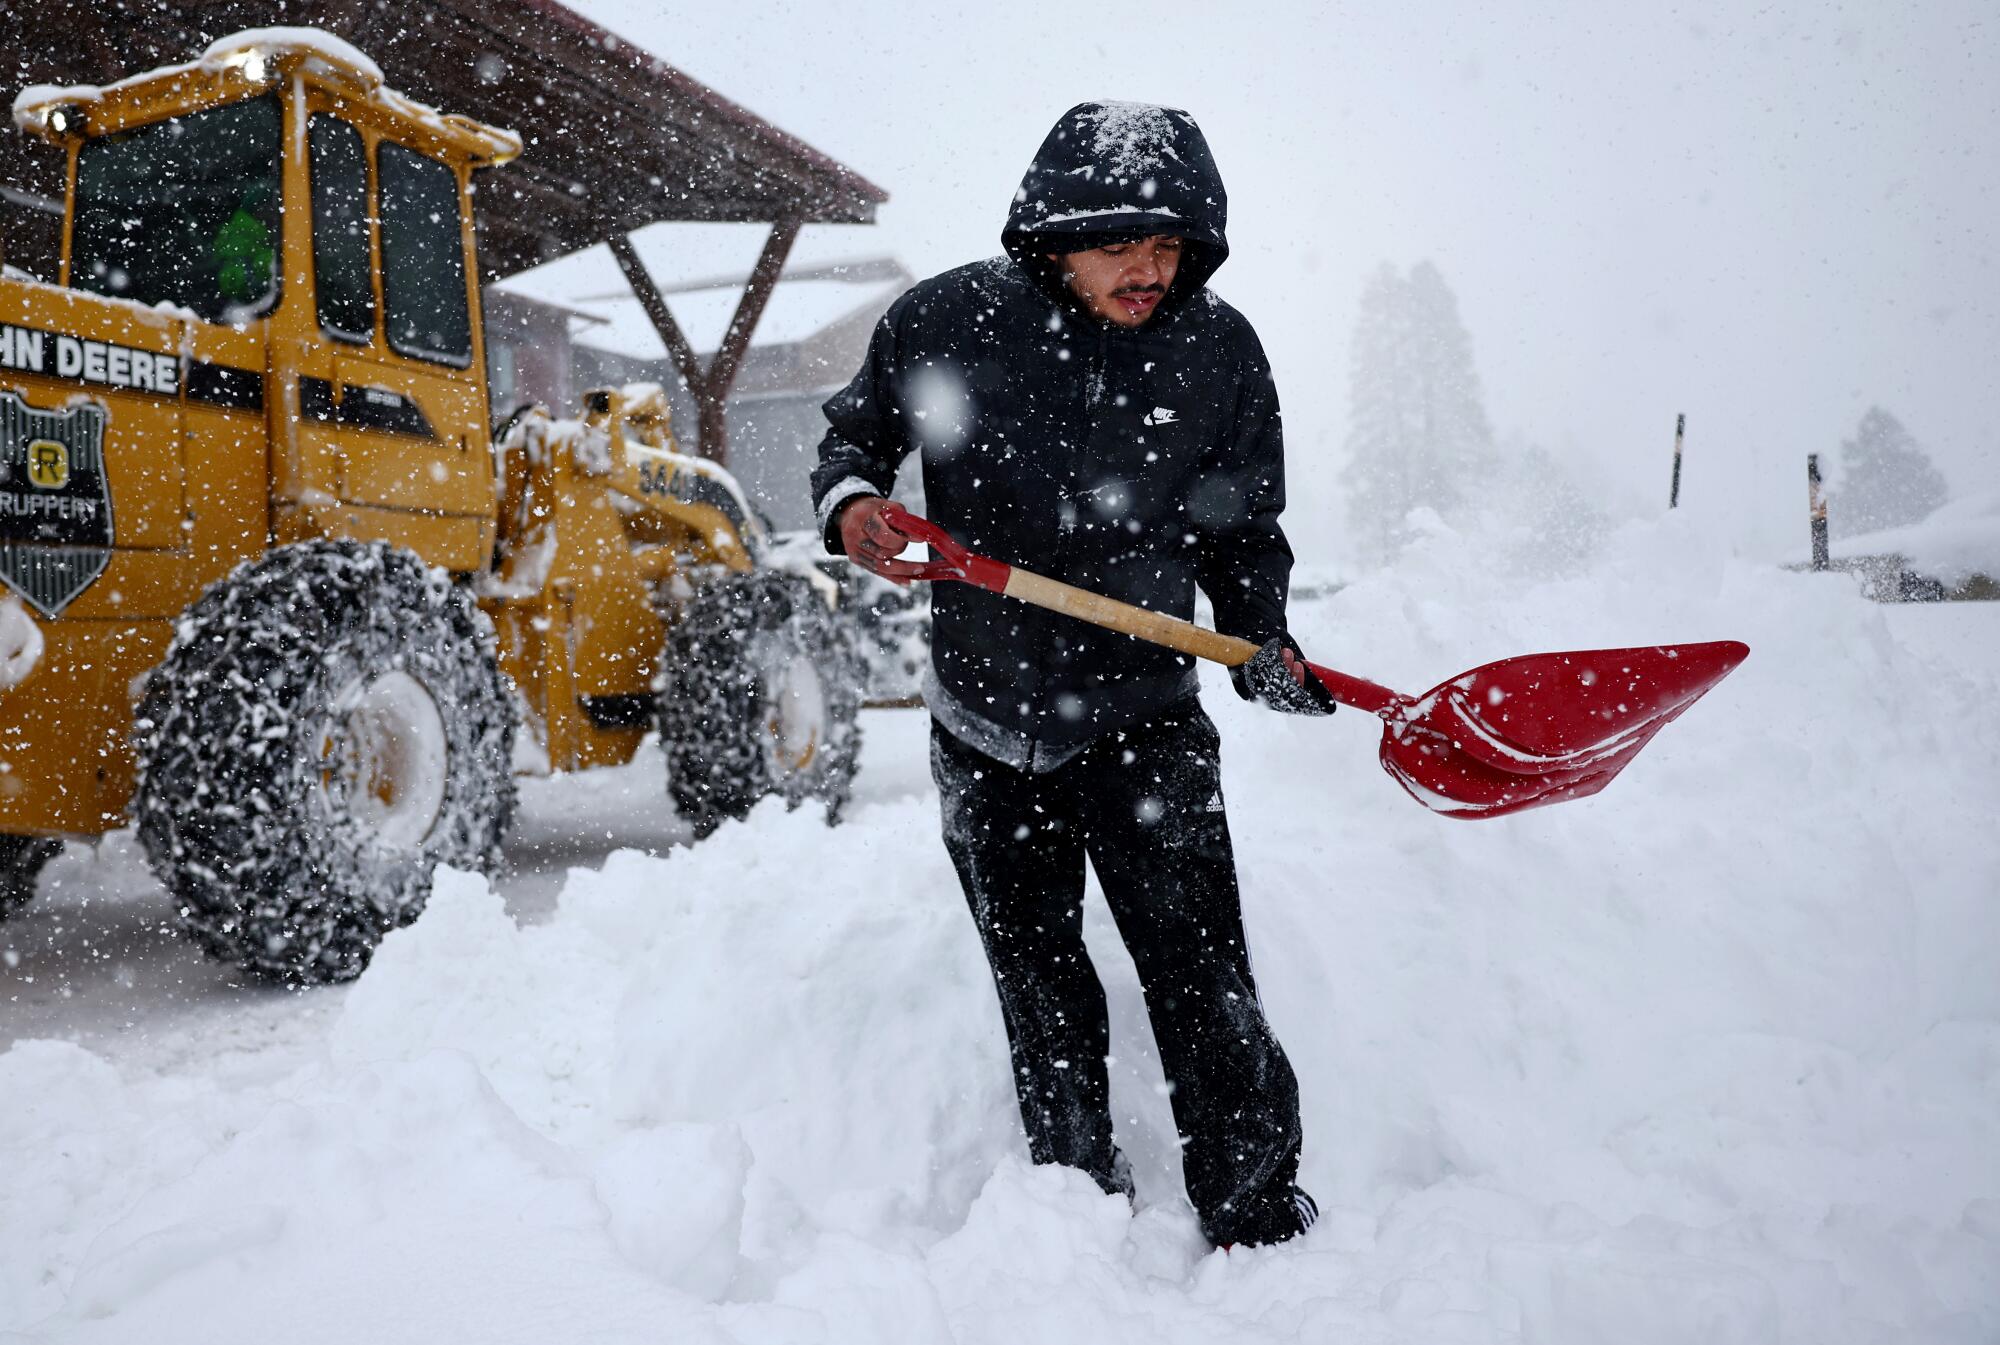 Luis Apolinar attempts to dig out his vehicle as snow falls.